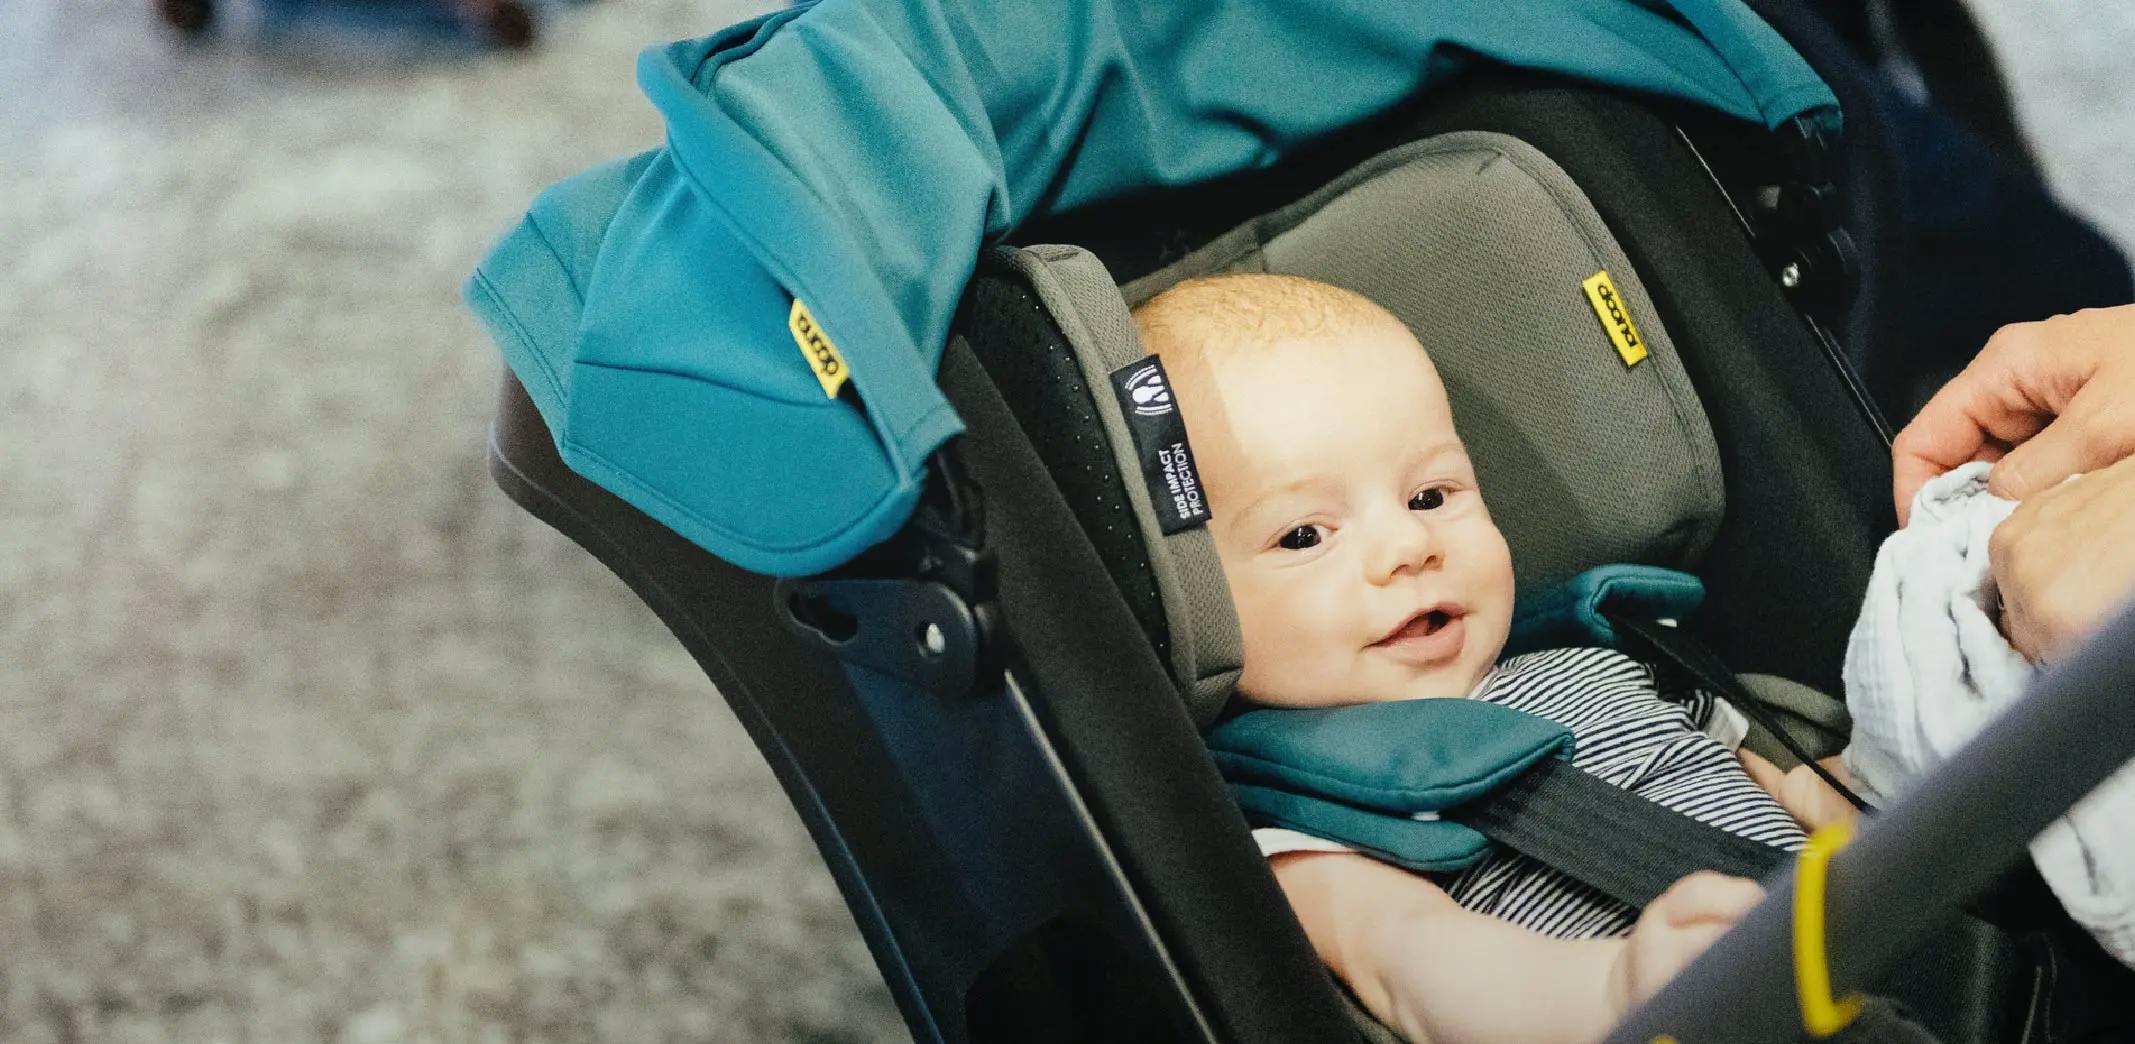 How Our Car Seat & Stroller Saved One Baby’s Life